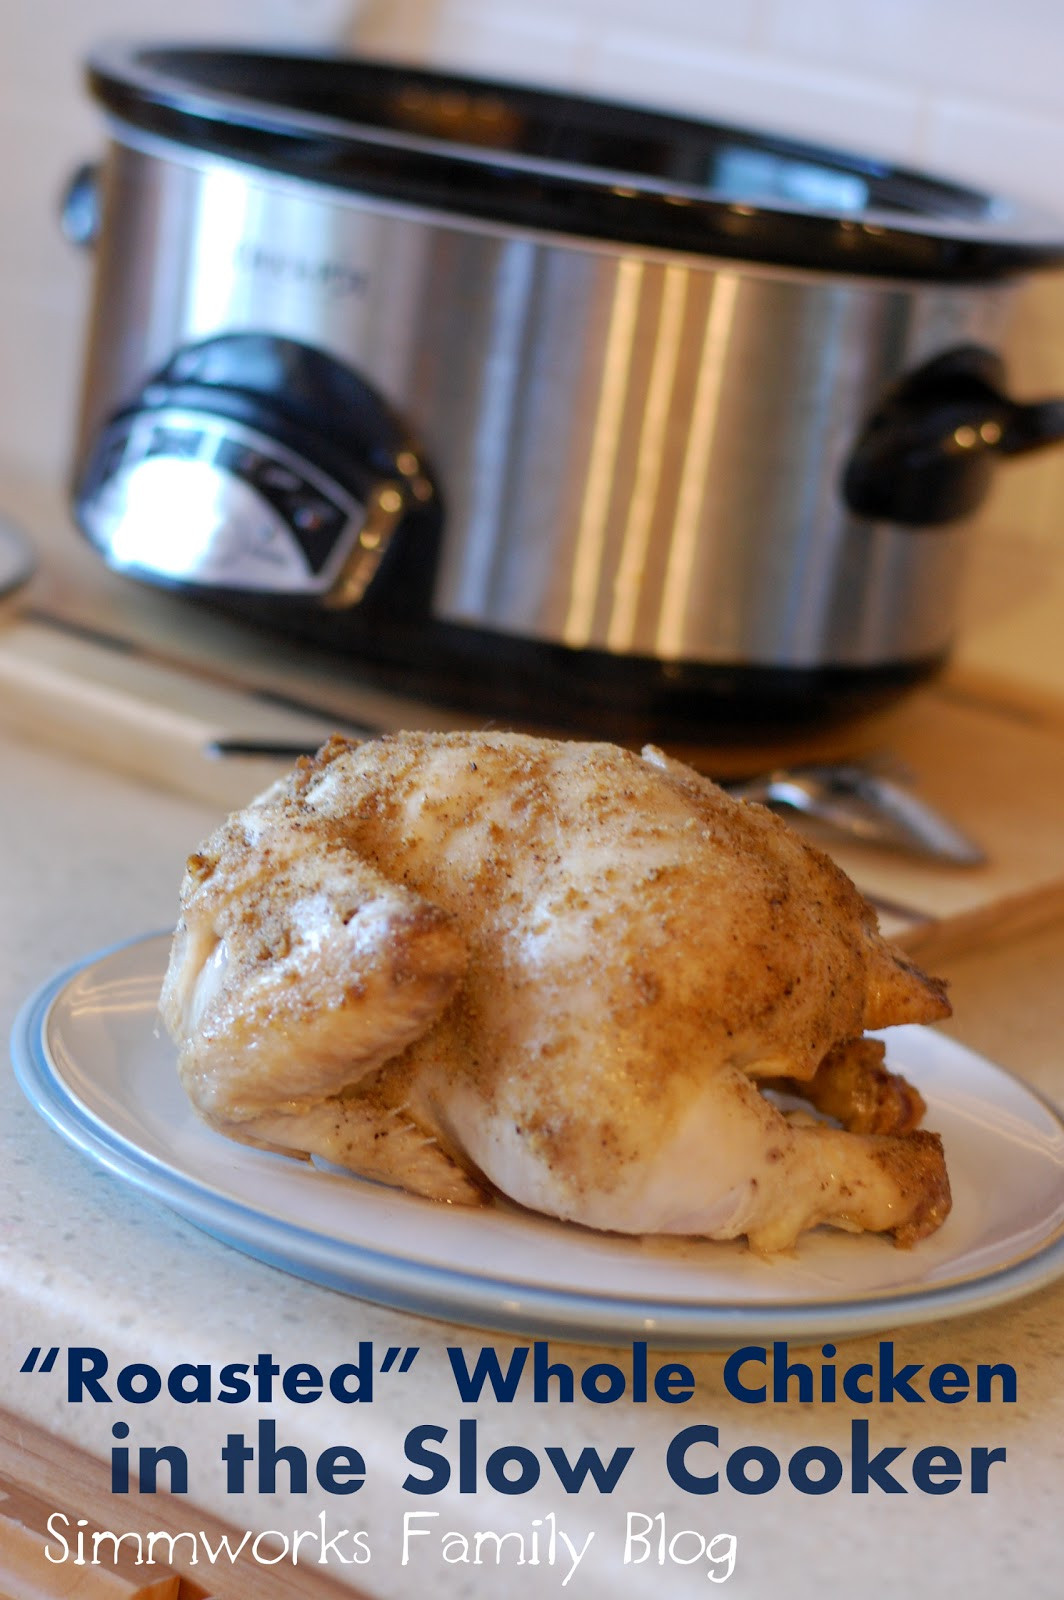 Whole Chicken Slow Cooker
 "Roasted" Whole Chicken Slow Cooker Dinner Recipe A